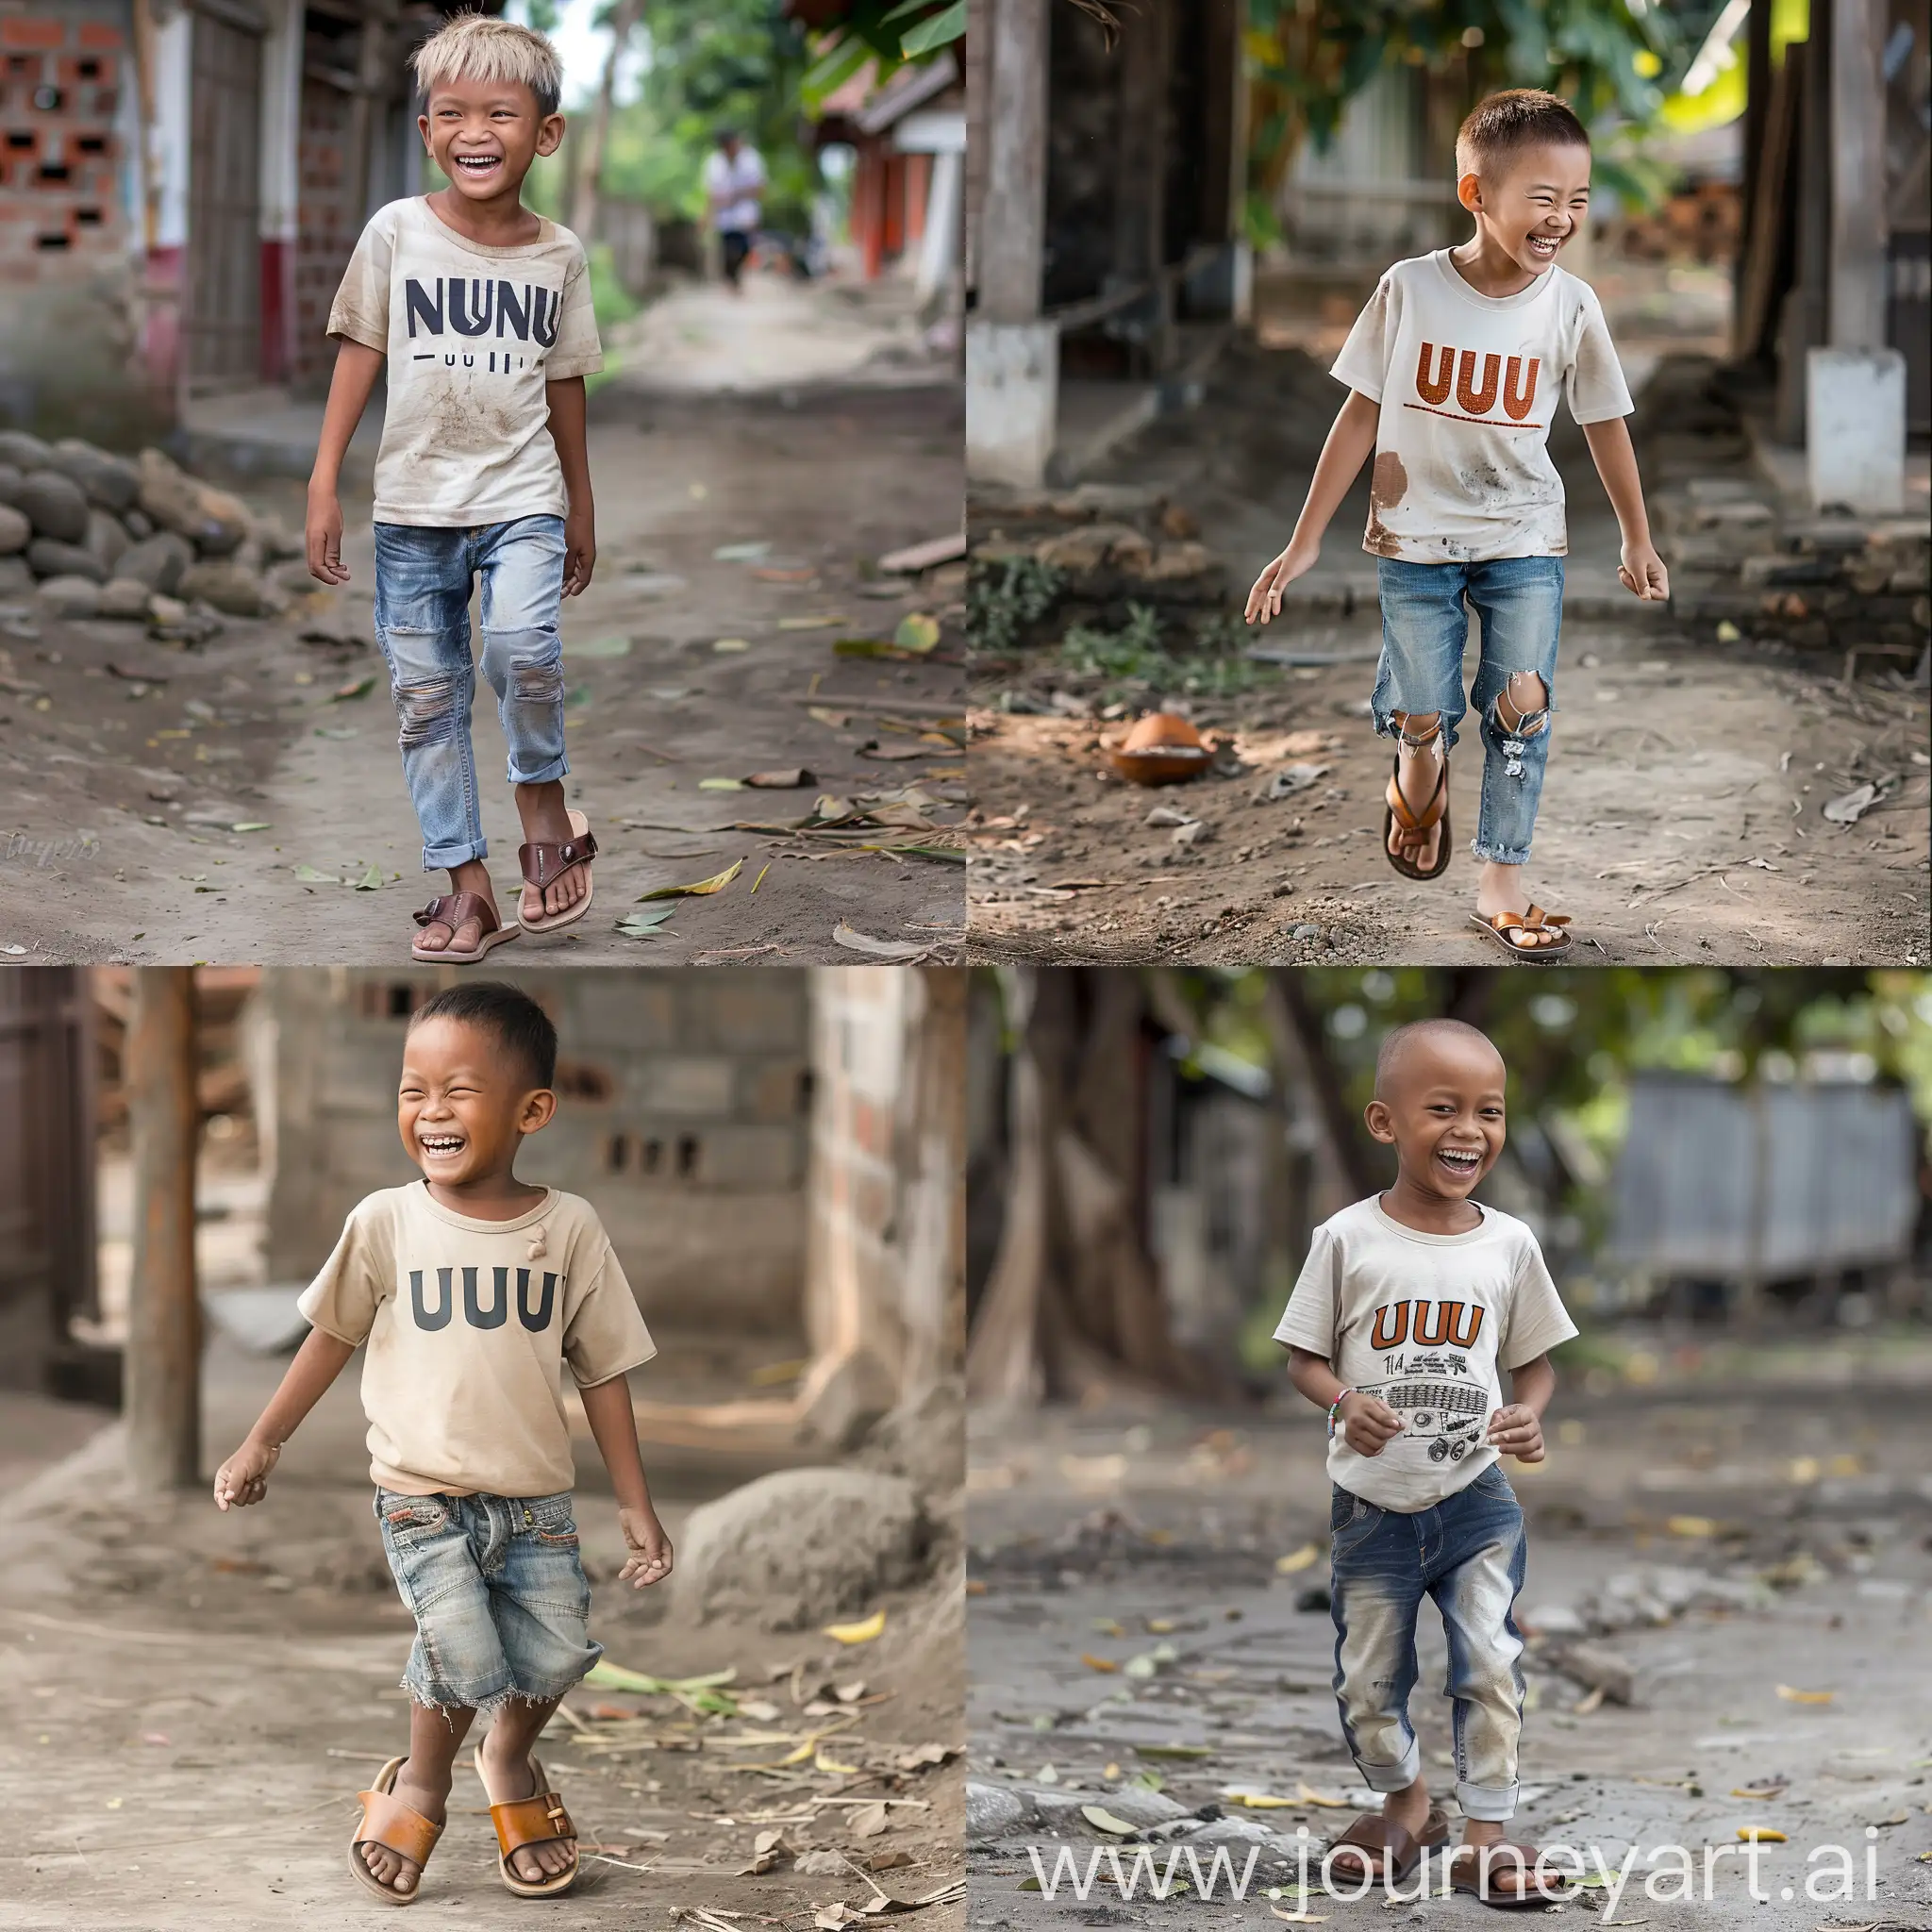 Indonesian boy, 14 years old, fair skin, bright eyes, wearing a T-shirt that says "NUNU", short jeans and leather sandals, laughing walking in the village, very realistic HD